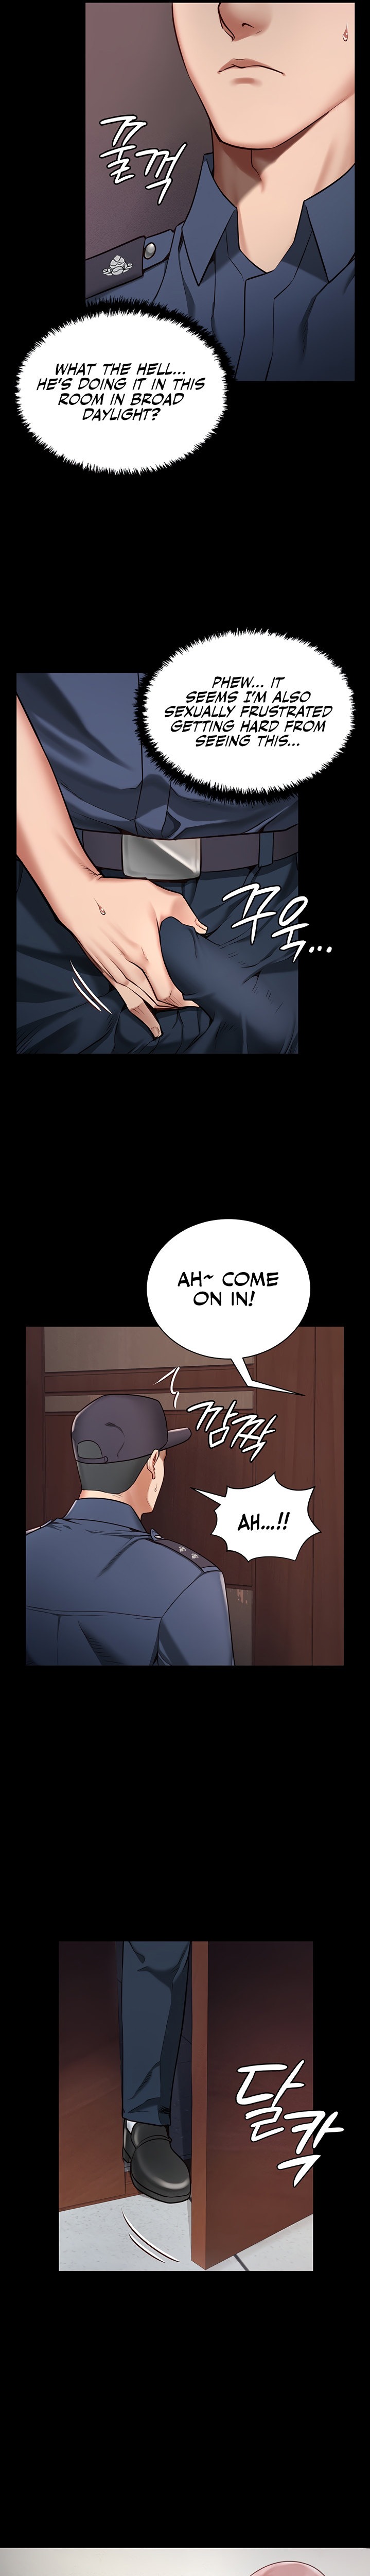 Locked Up - Chapter 1 Page 16